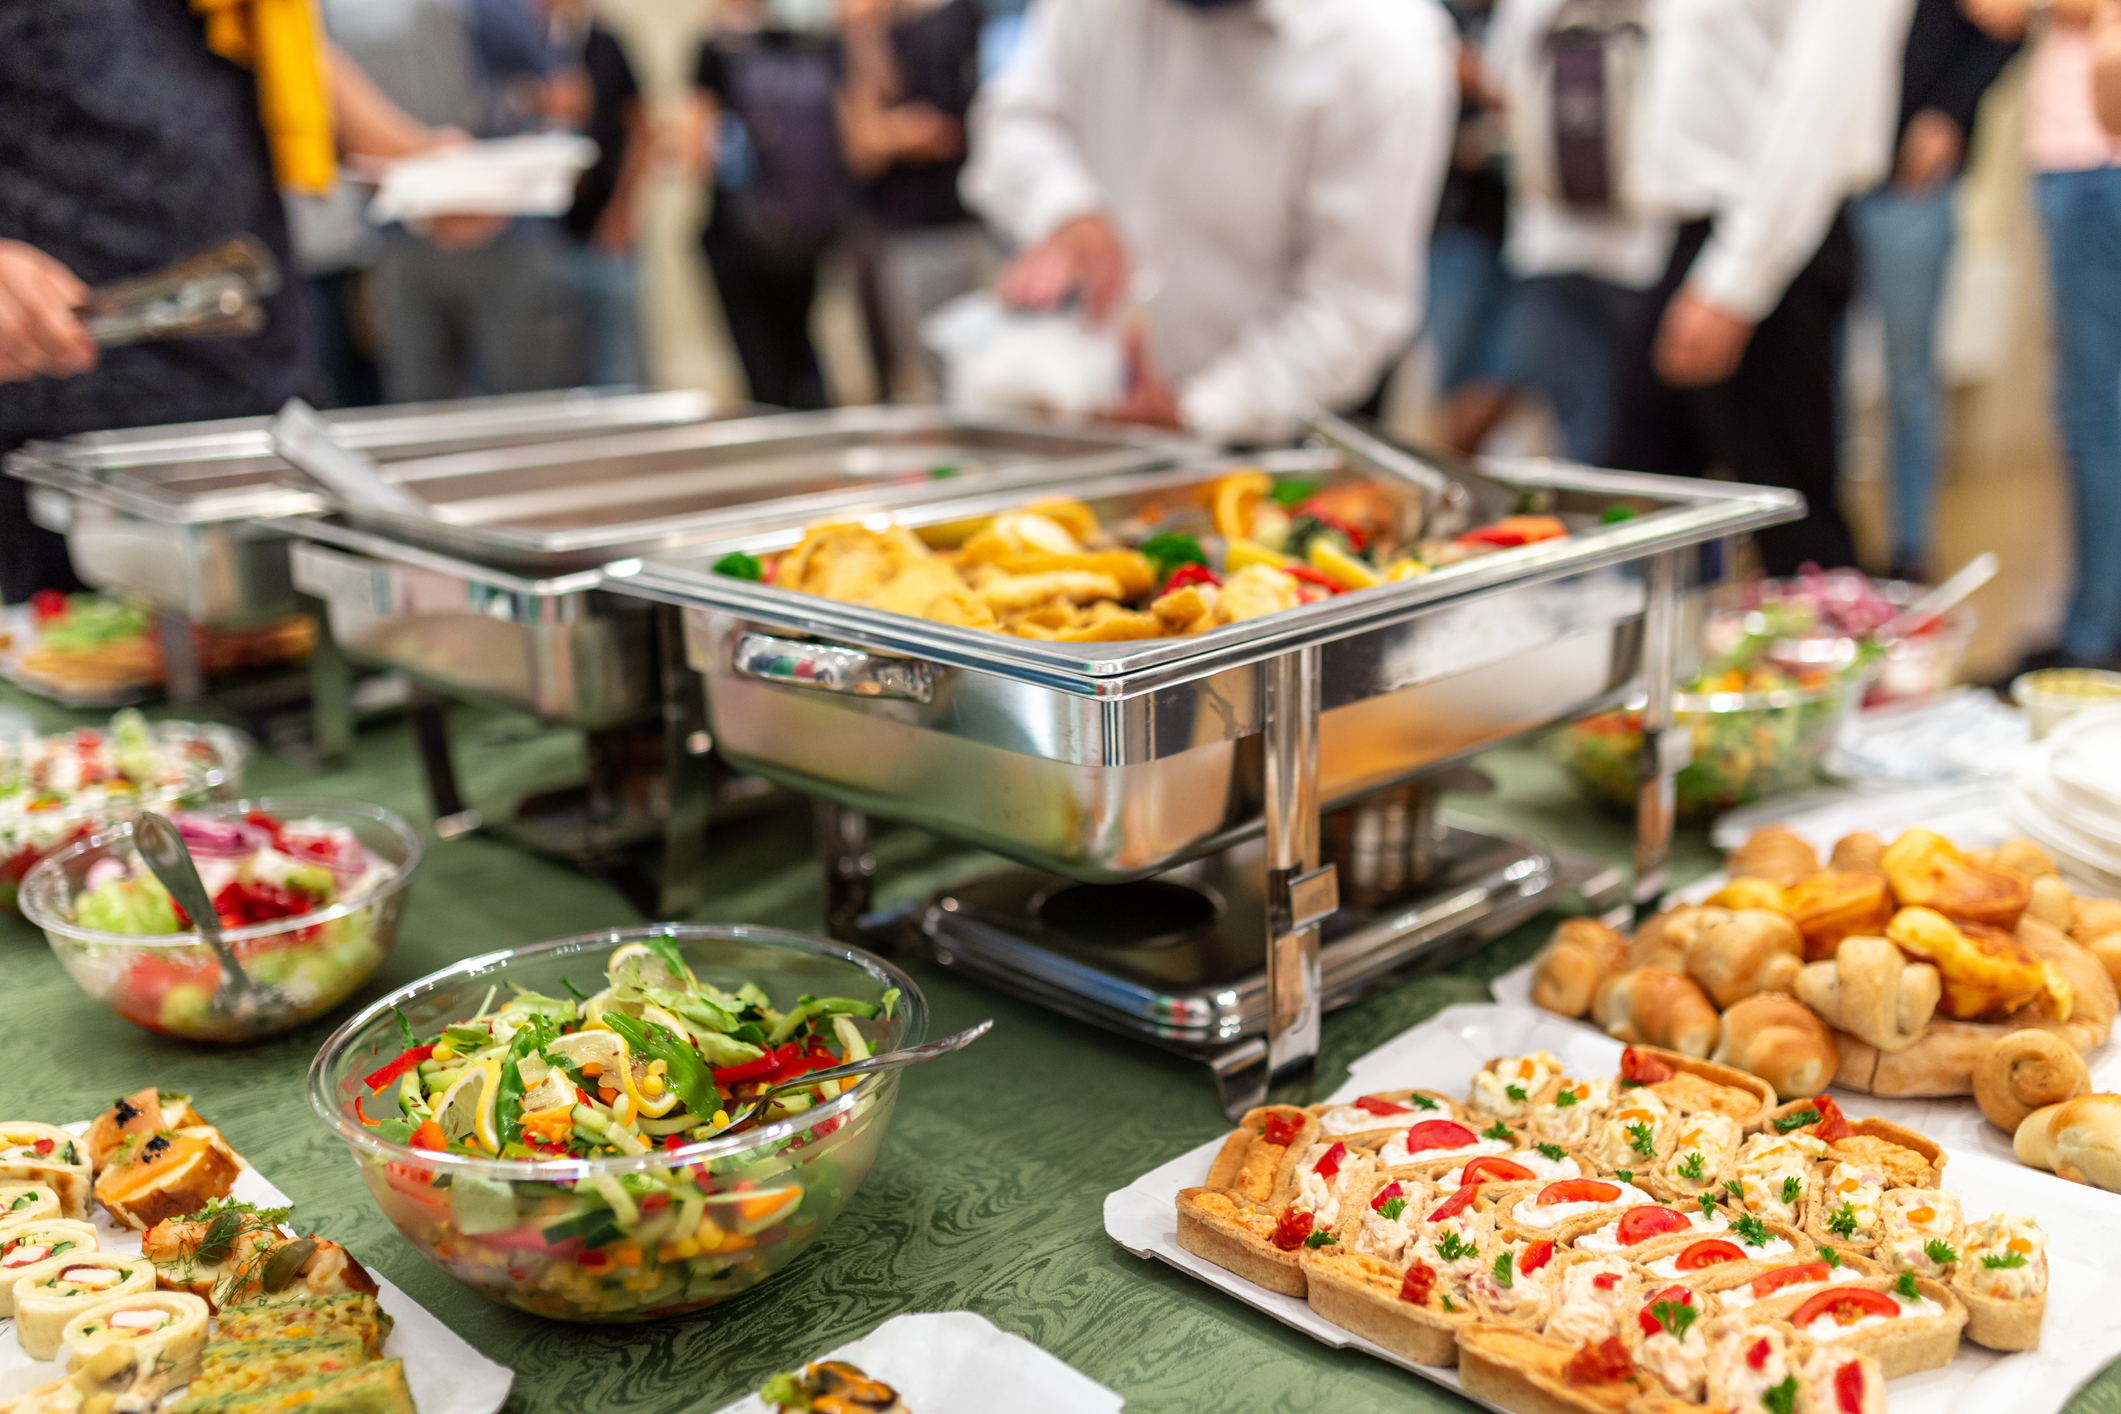 Warming tray with food and people in the background. Party lunch or dinner concept.